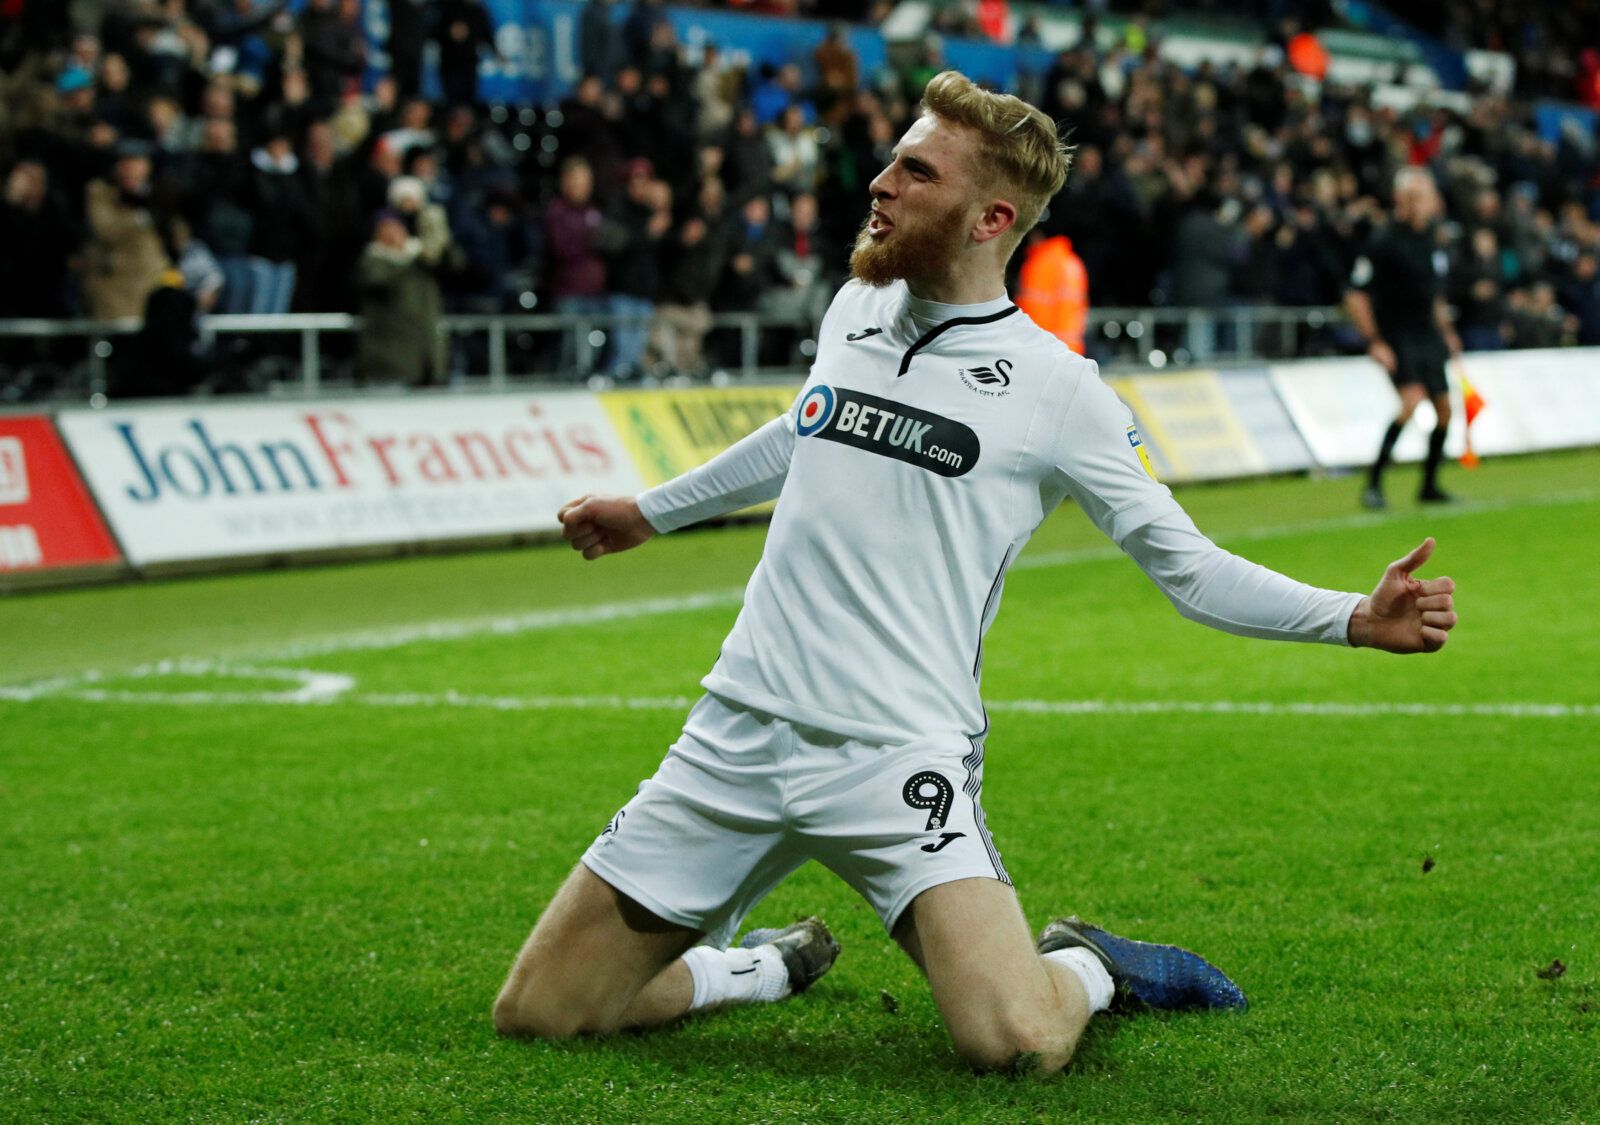 Soccer Football - Championship - Swansea City v Birmingham City - Liberty Stadium, Swansea, Britain - January 29, 2019  Swansea City's Oliver McBurnie celebrates scoring their third goal  Action Images/John Sibley  EDITORIAL USE ONLY. No use with unauthorized audio, video, data, fixture lists, club/league logos or 